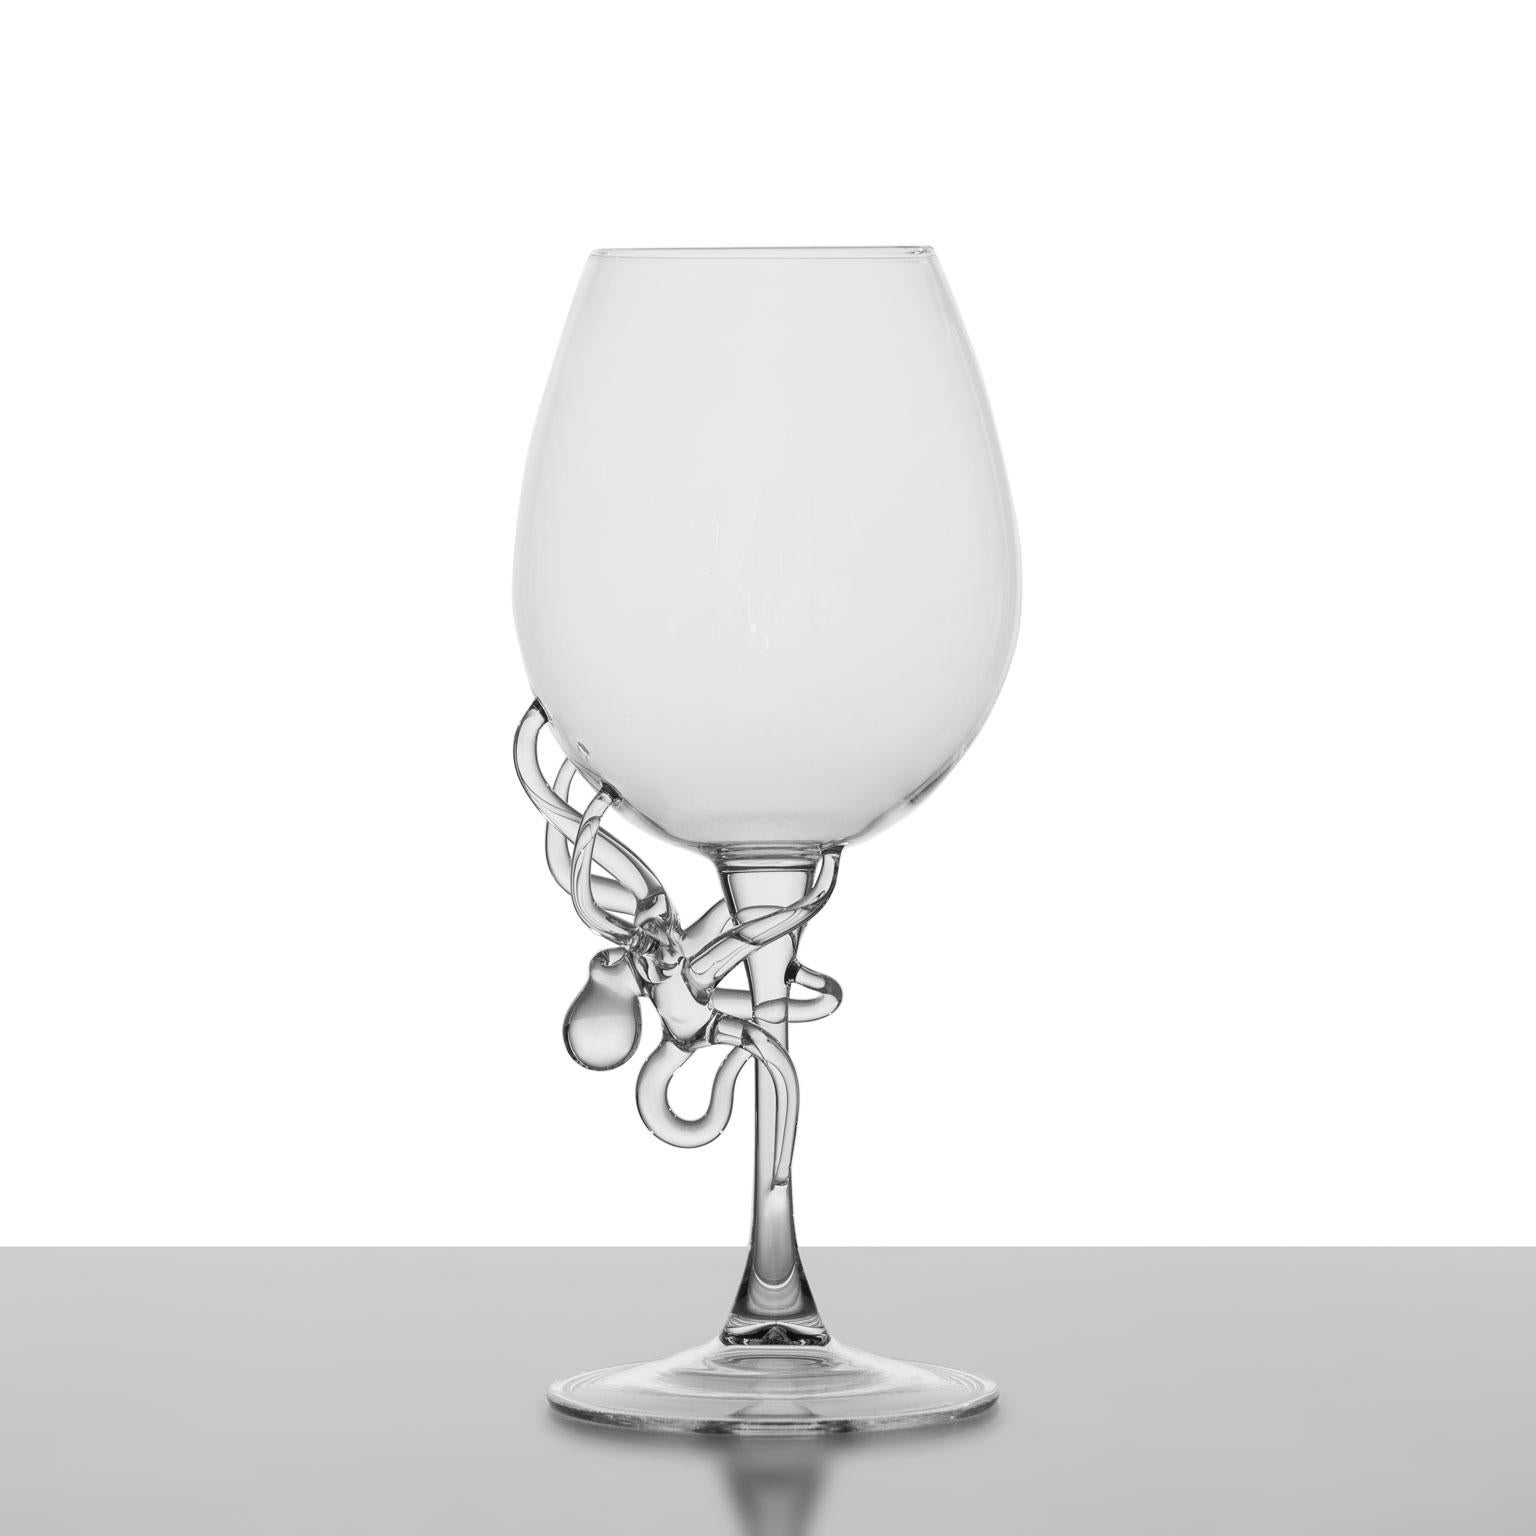 'Polpo White Wine Glass'
A Hand-Blown White Wine Glass by Simone Crestani
Polpo White Wine Glass is one of the pieces from the Polpo Collection.

The enveloping elegance of the Polpo Collection may make you believe that the animal is really